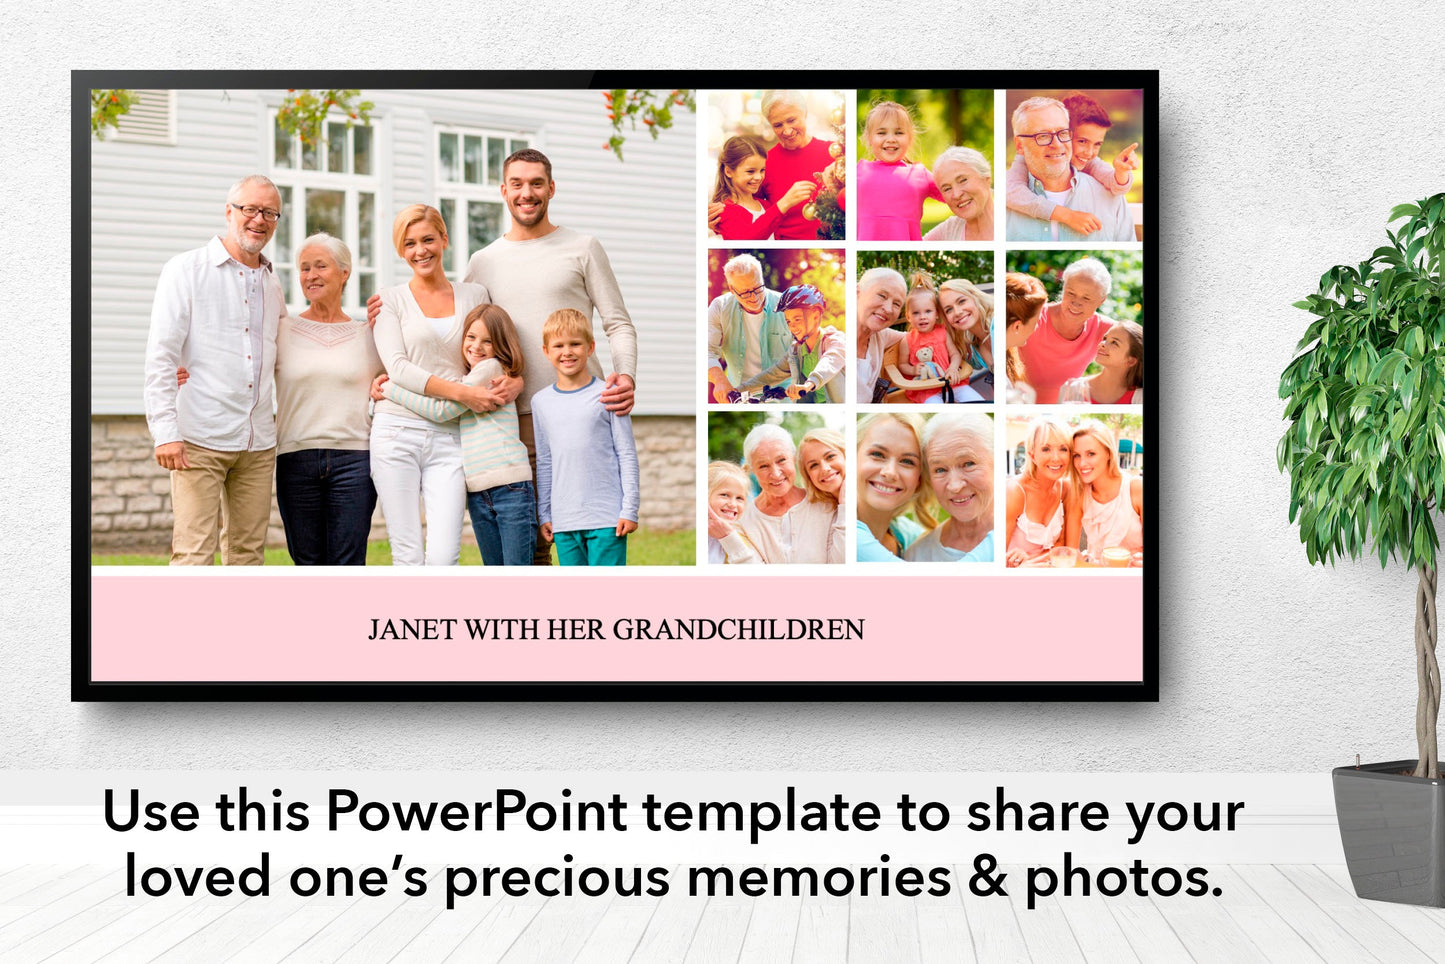 Premium Funeral Slideshow Template with Pink Band